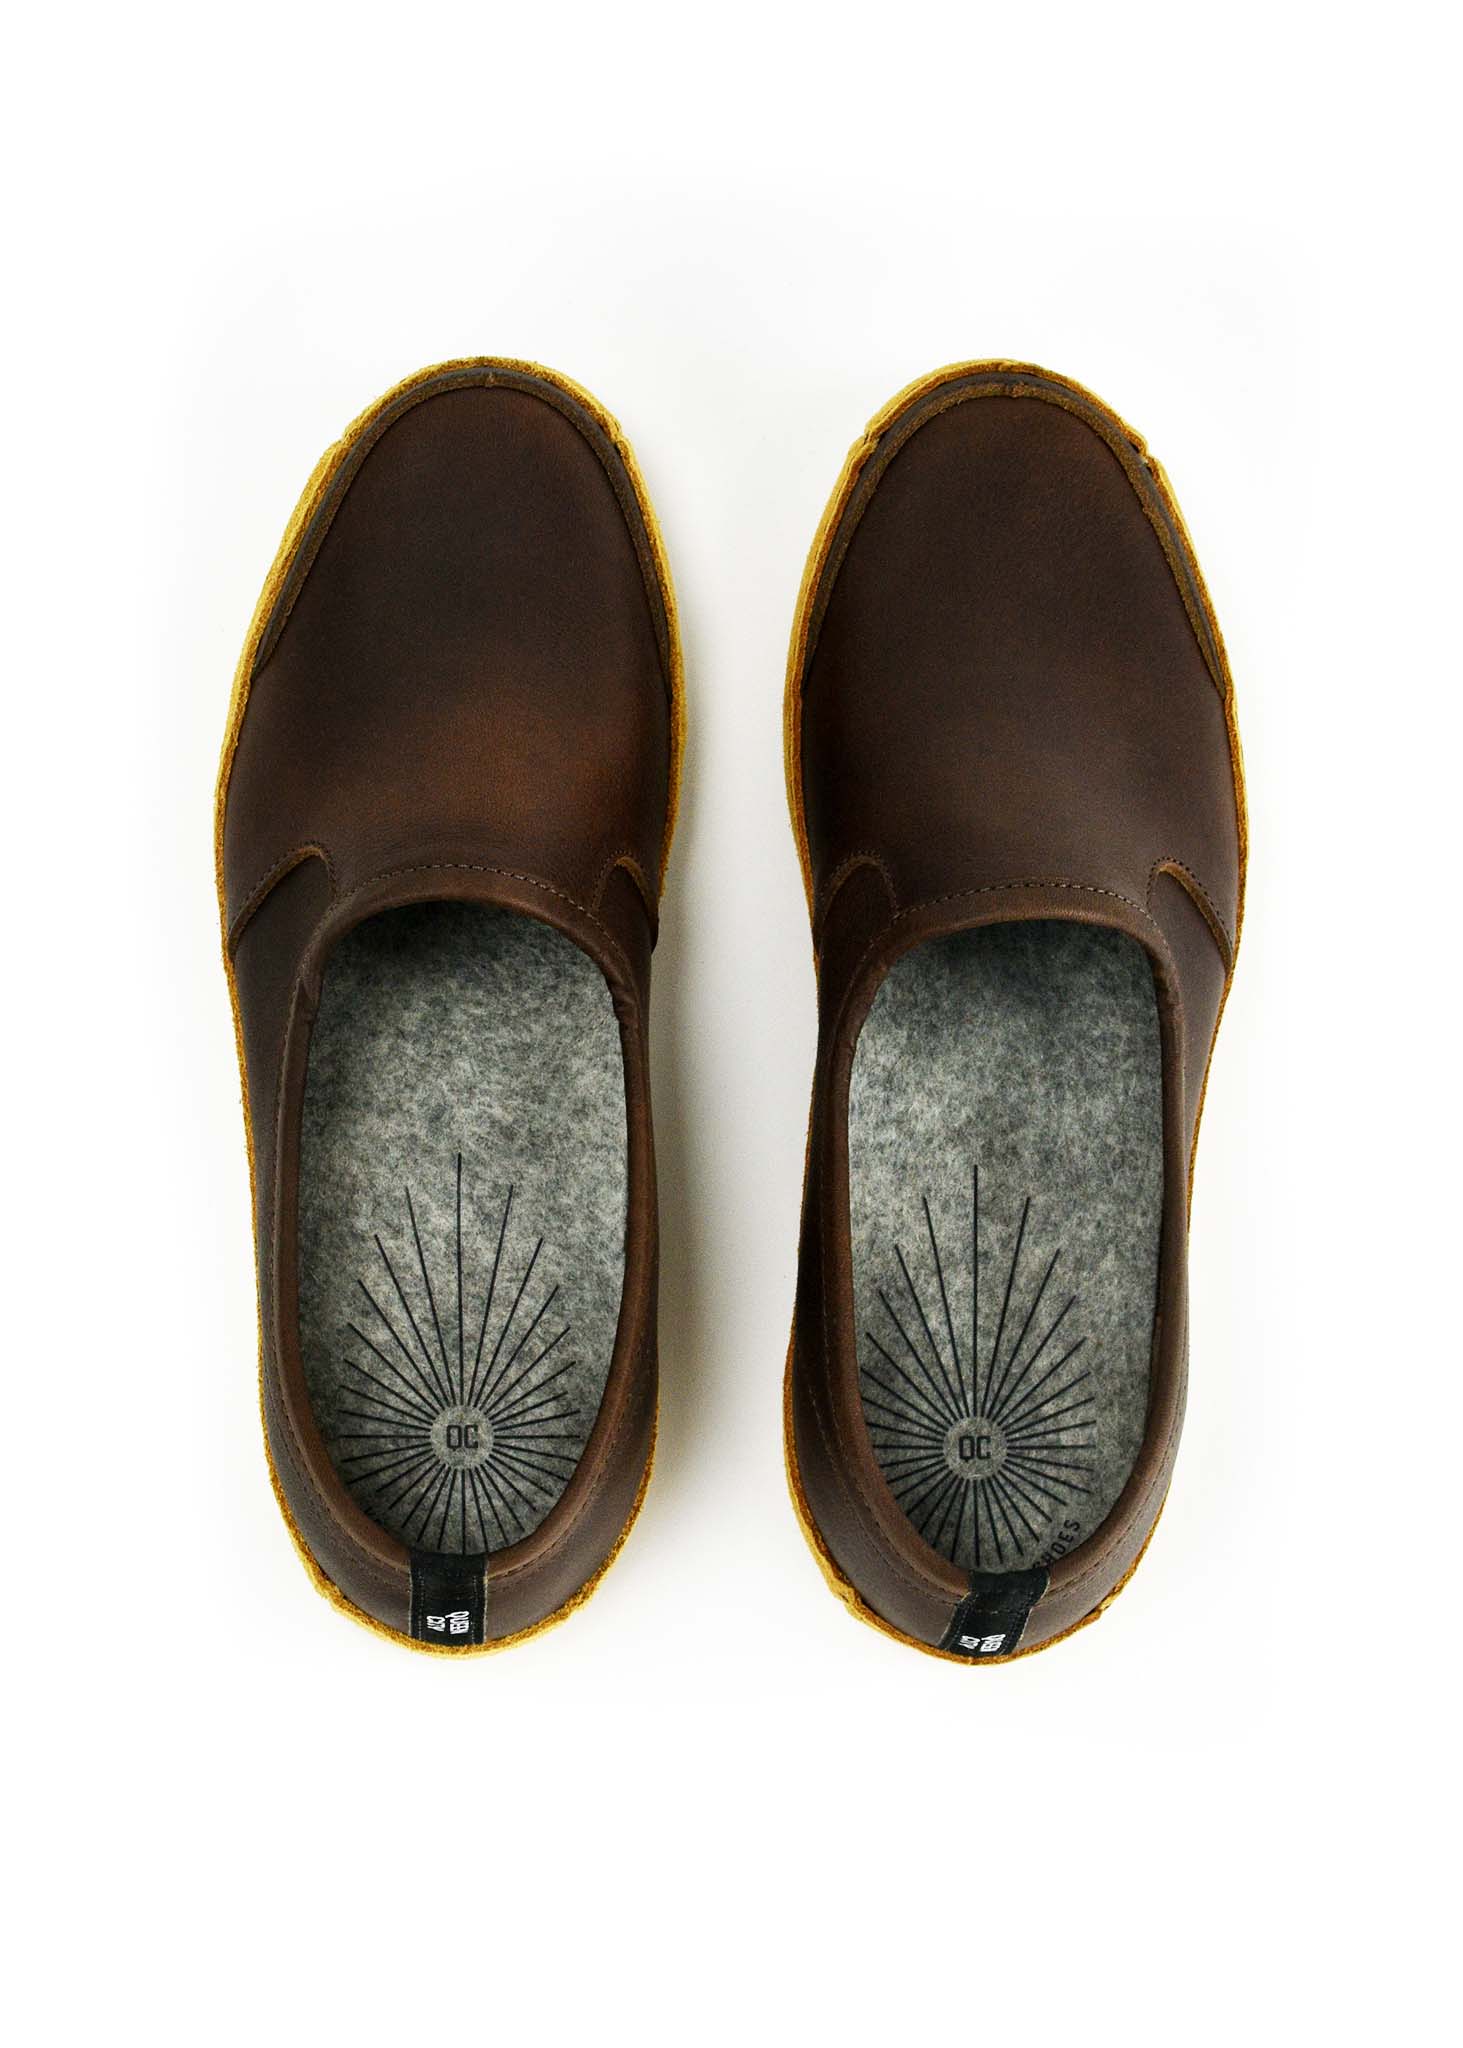 Vermont House Shoes - Loafer - Chocolate top view